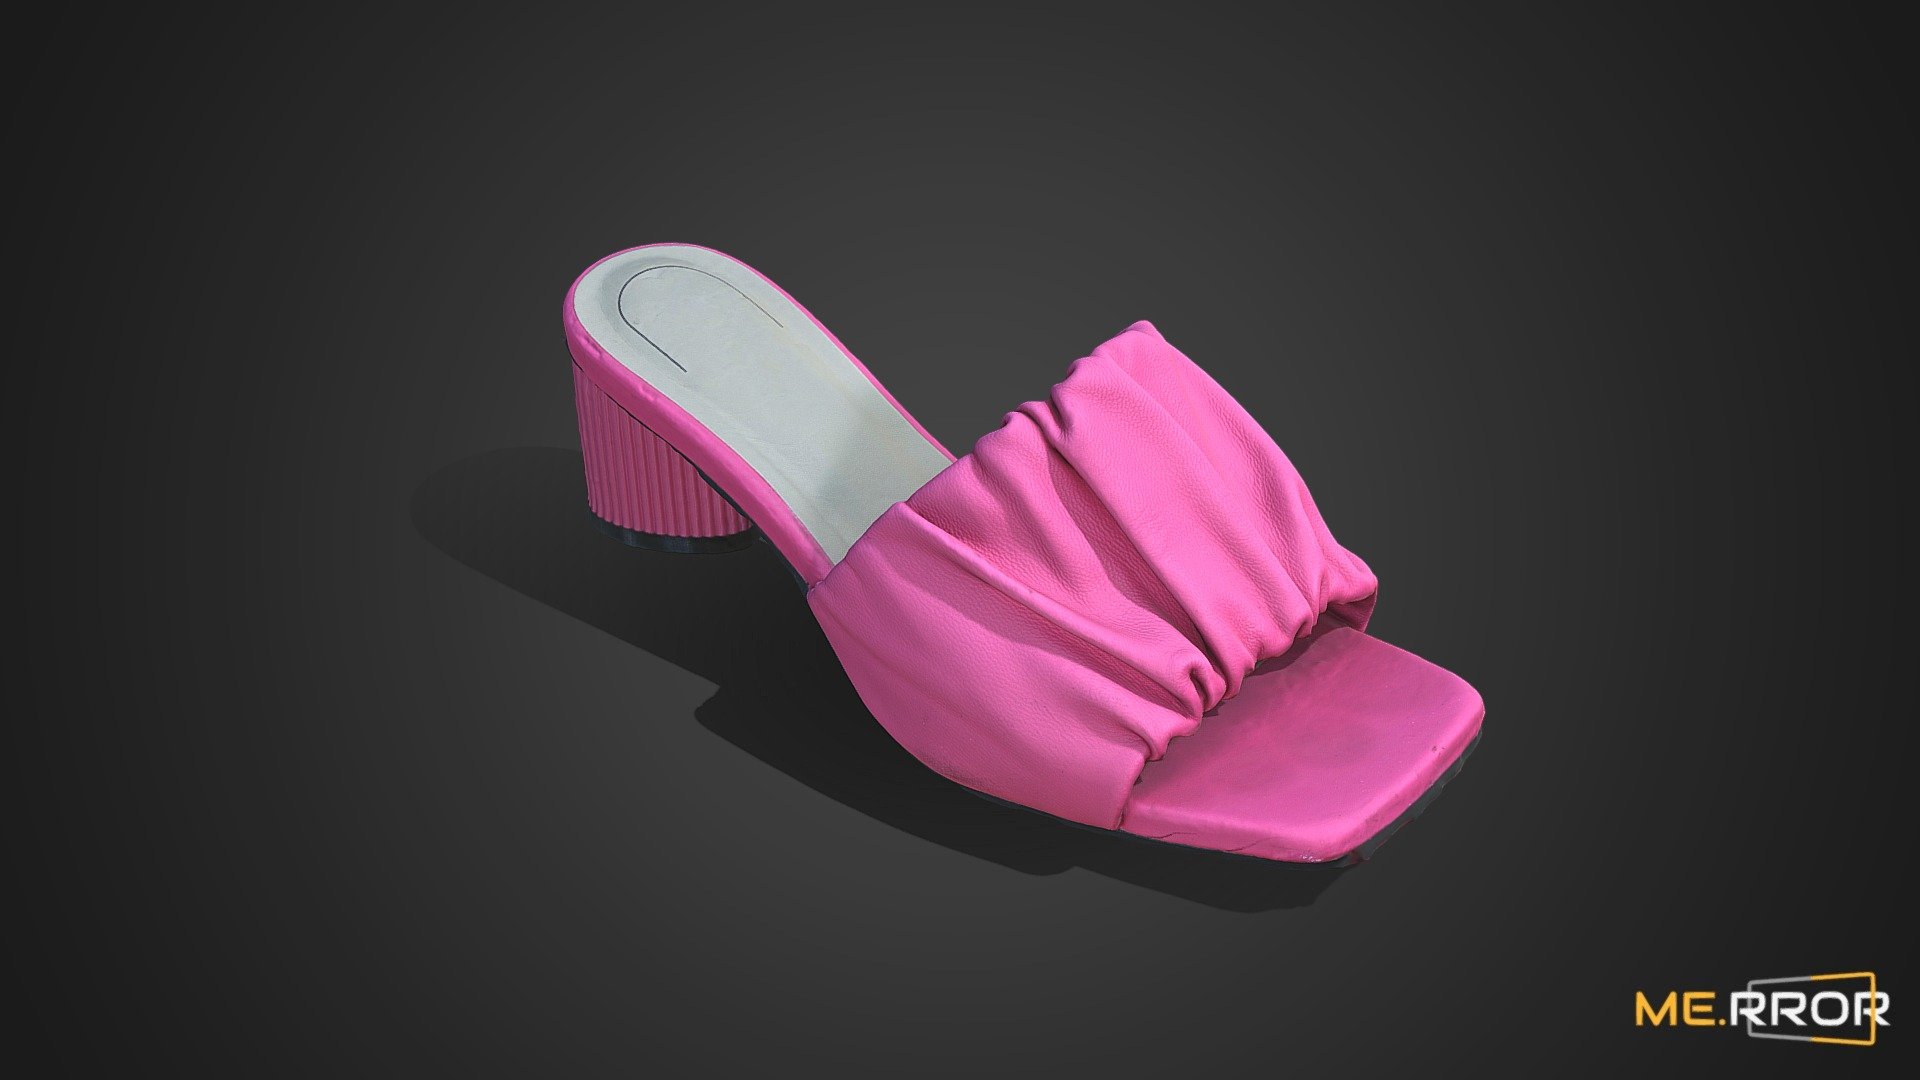 MERROR is a 3D Content PLATFORM which introduces various Asian assets to the 3D world


3DScanning #Photogrametry #ME.RROR - Pink Pleated Woman's Heel Sandals - Buy Royalty Free 3D model by ME.RROR (@merror) 3d model